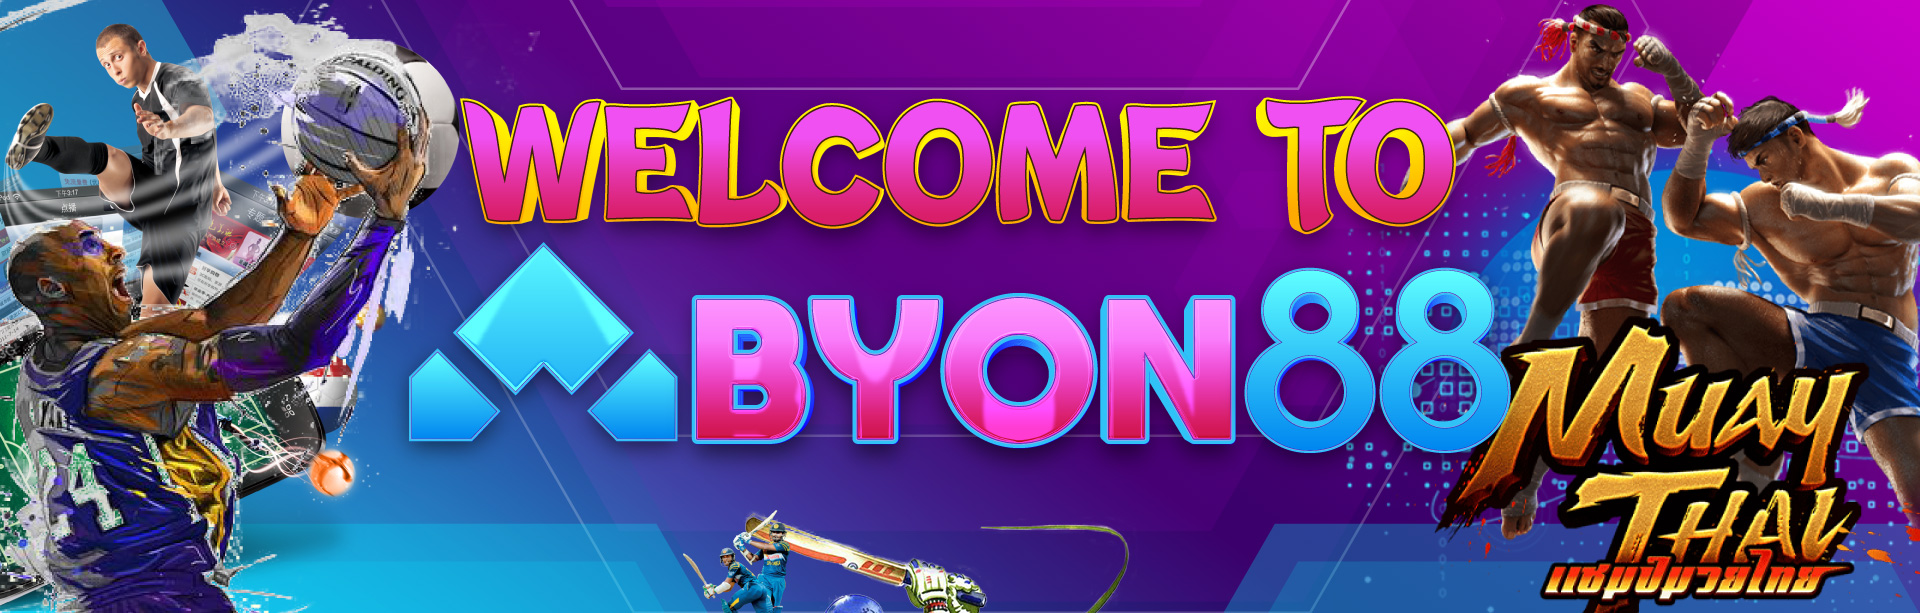 WELCOME TO BYON88